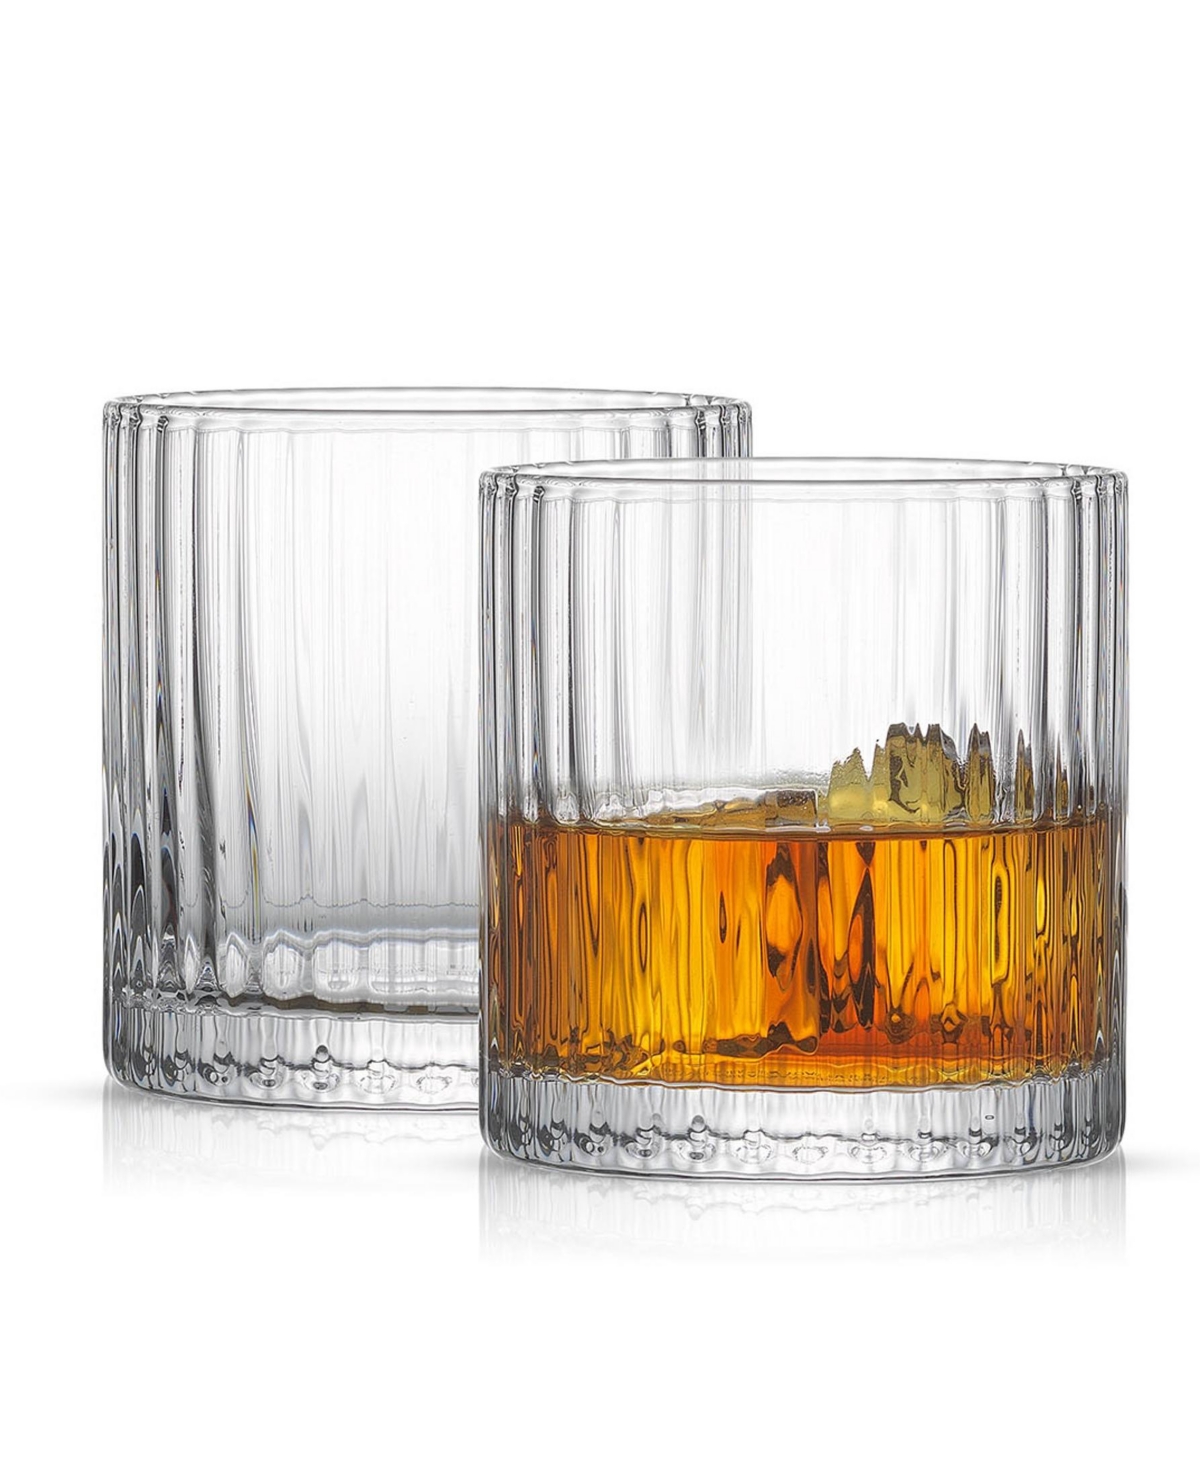 Joyjolt Elle Ribbed Double Old Fashioned Glass 10 oz 2 Piece Set In Clear